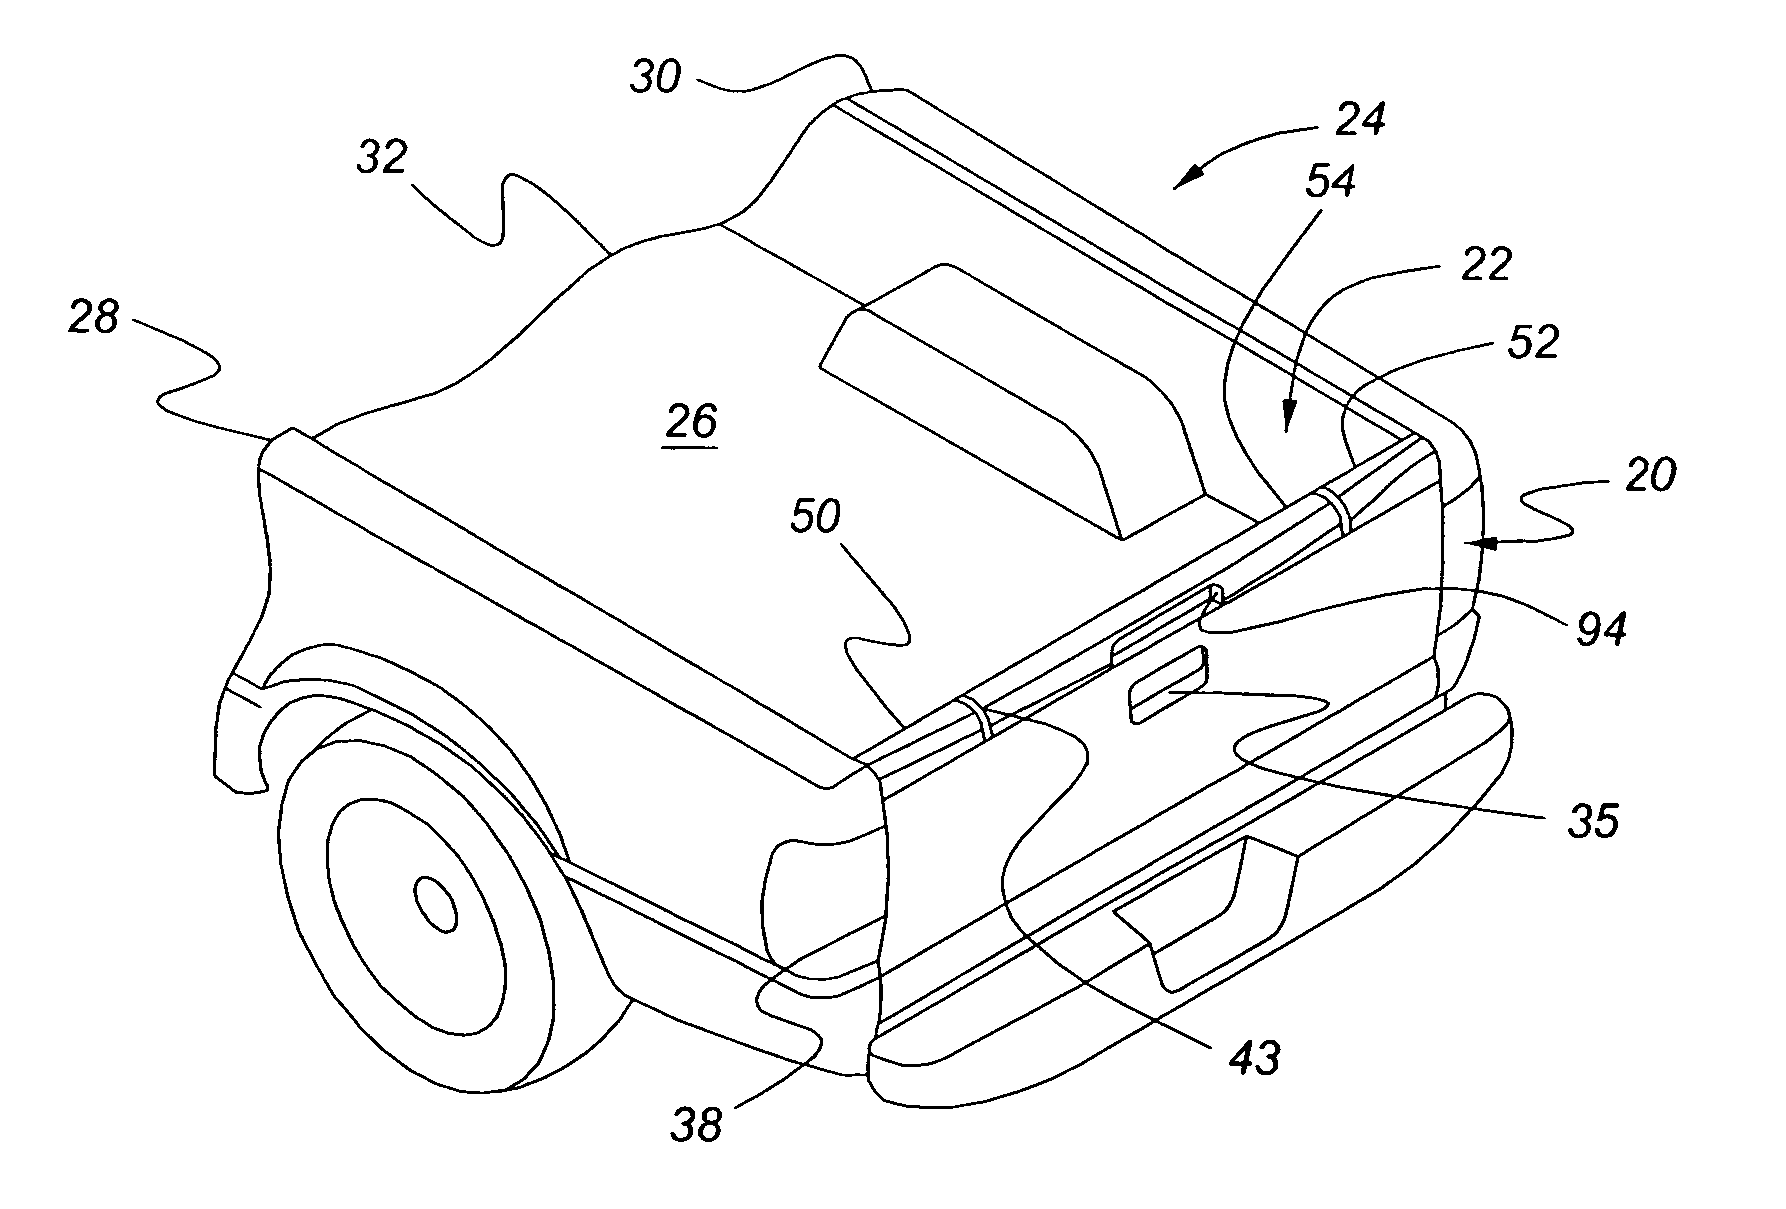 Vehicle tailgate with supplemental tailgate having vertical extension mode